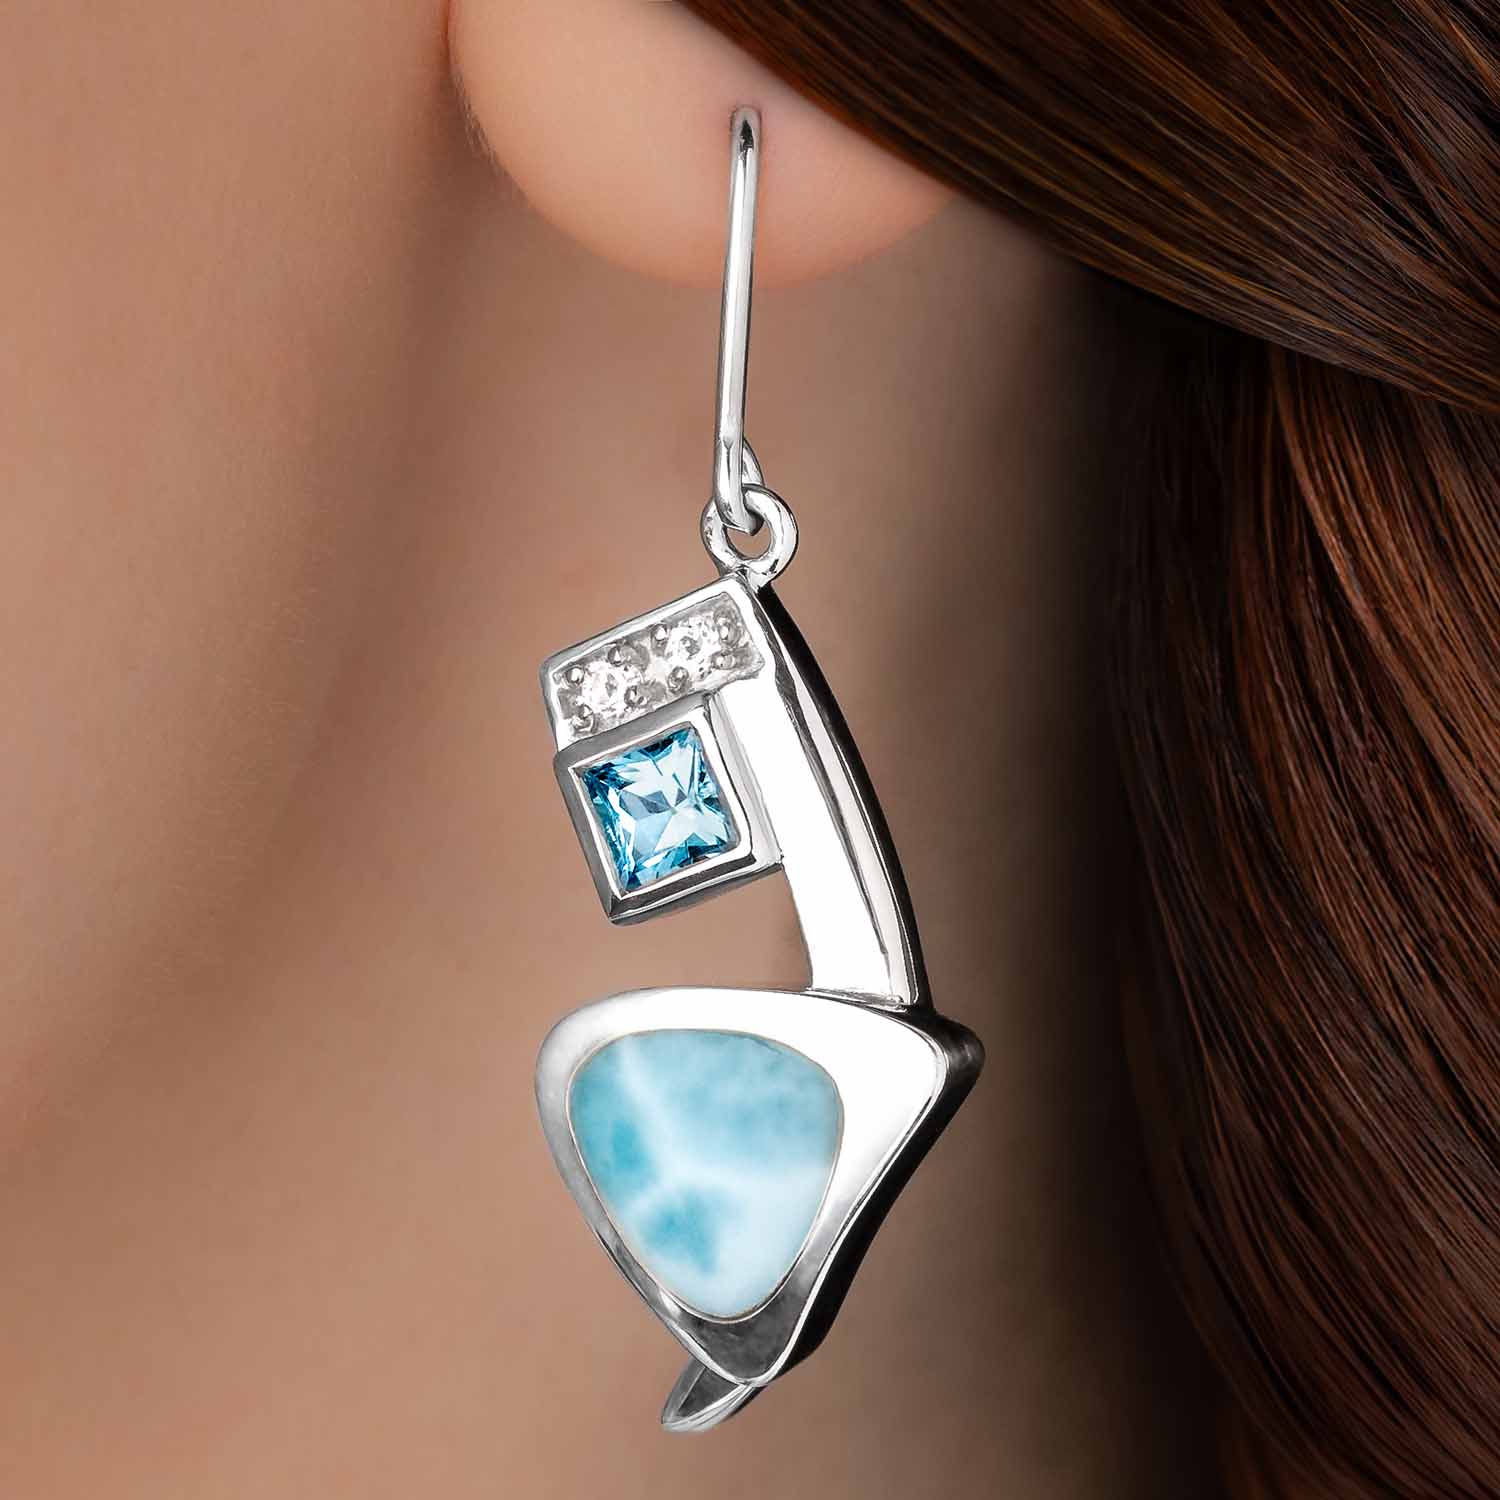 Designer Earrings with topaz and larimar  by marahlago